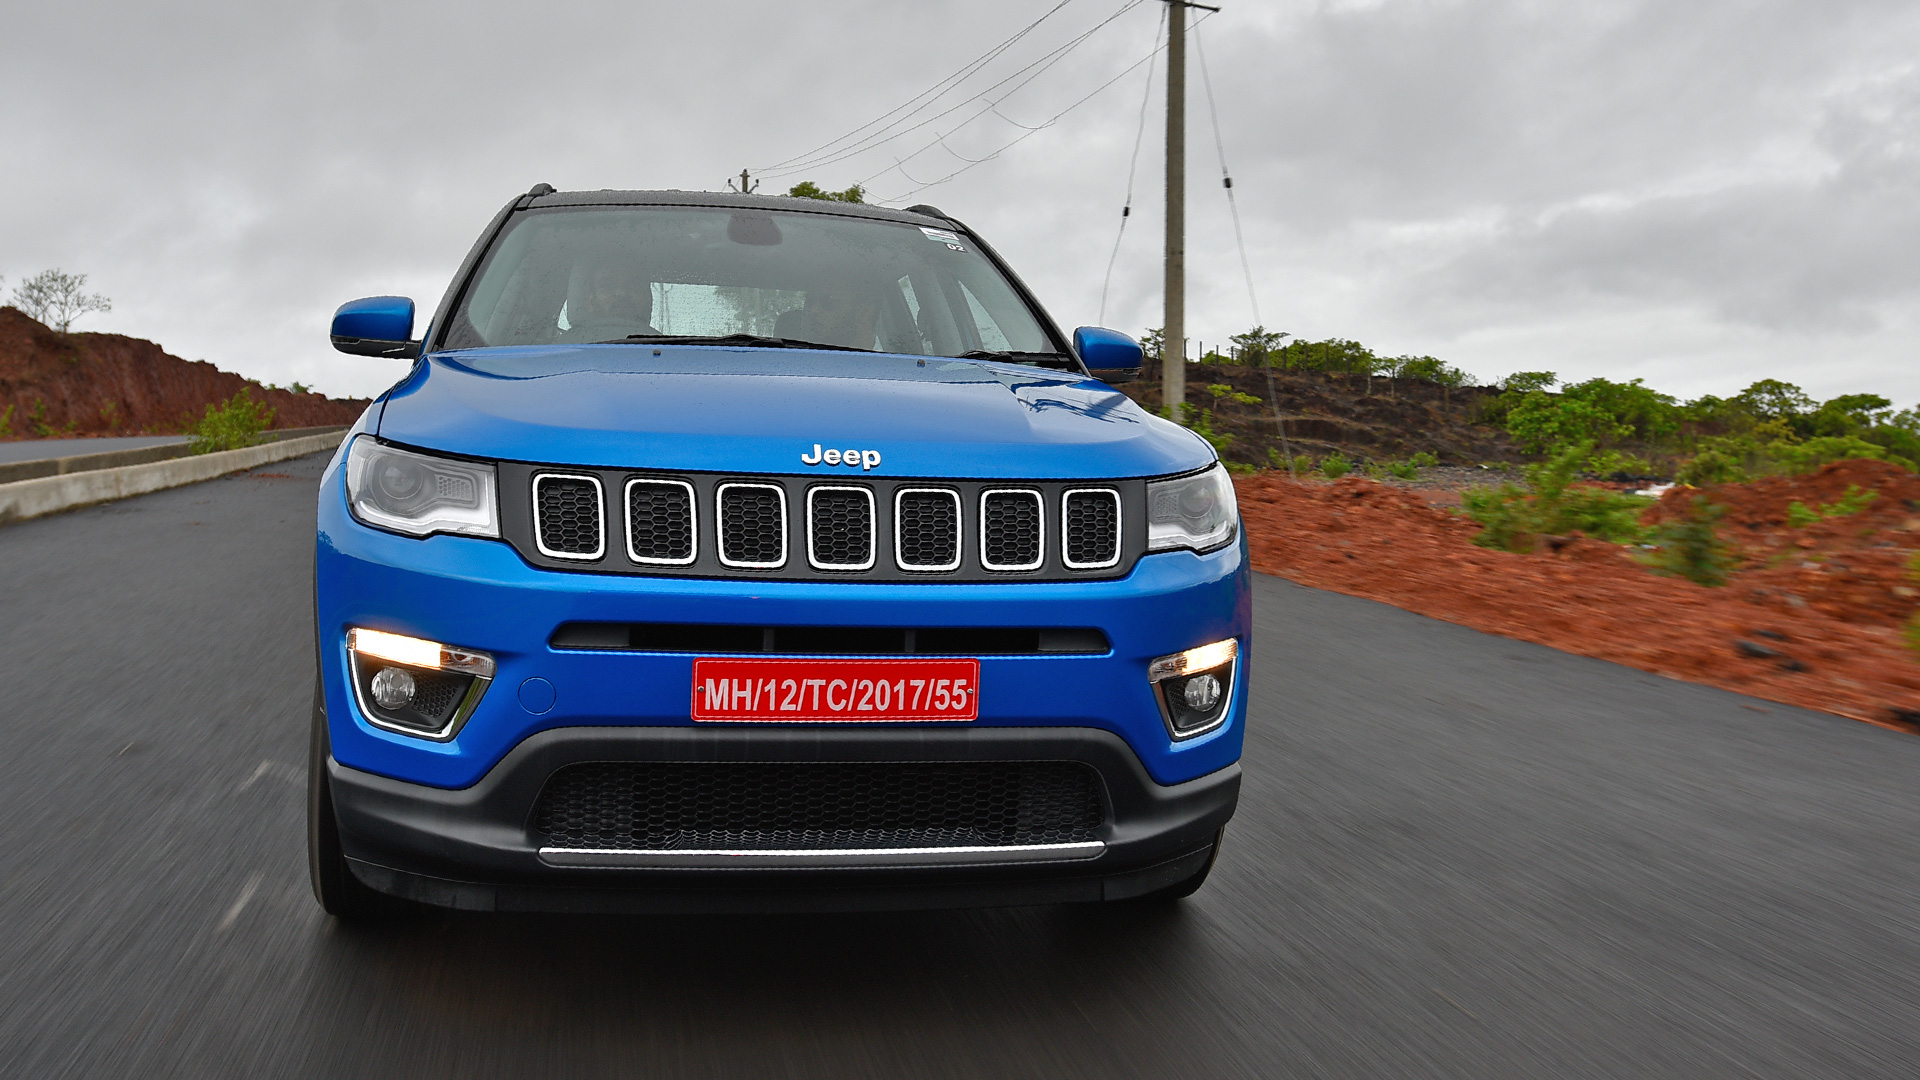 Jeep Compass 2017 Limited Diesel 4x4 Exterior